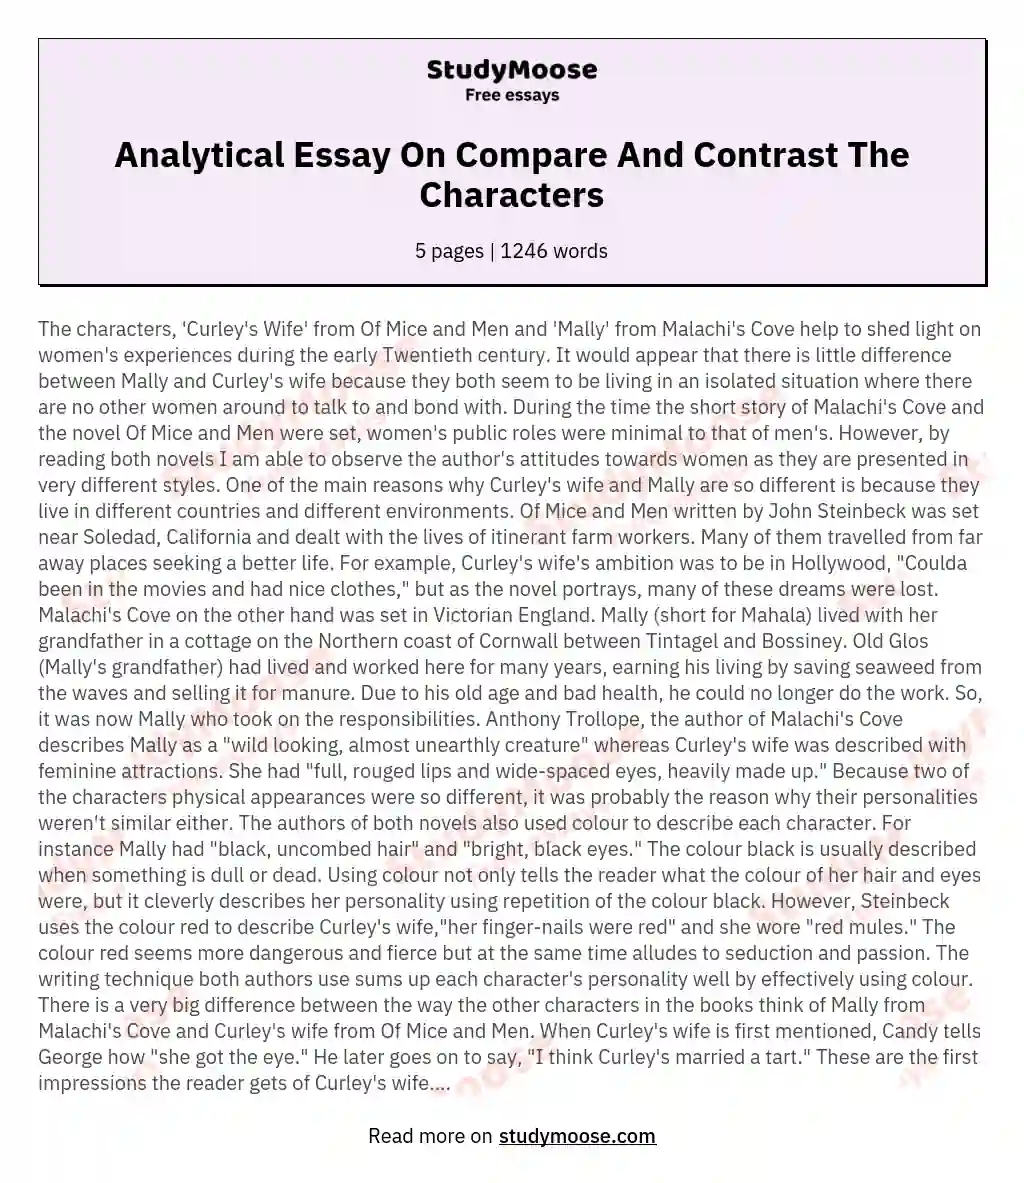 compare and contrast dog and cat essay